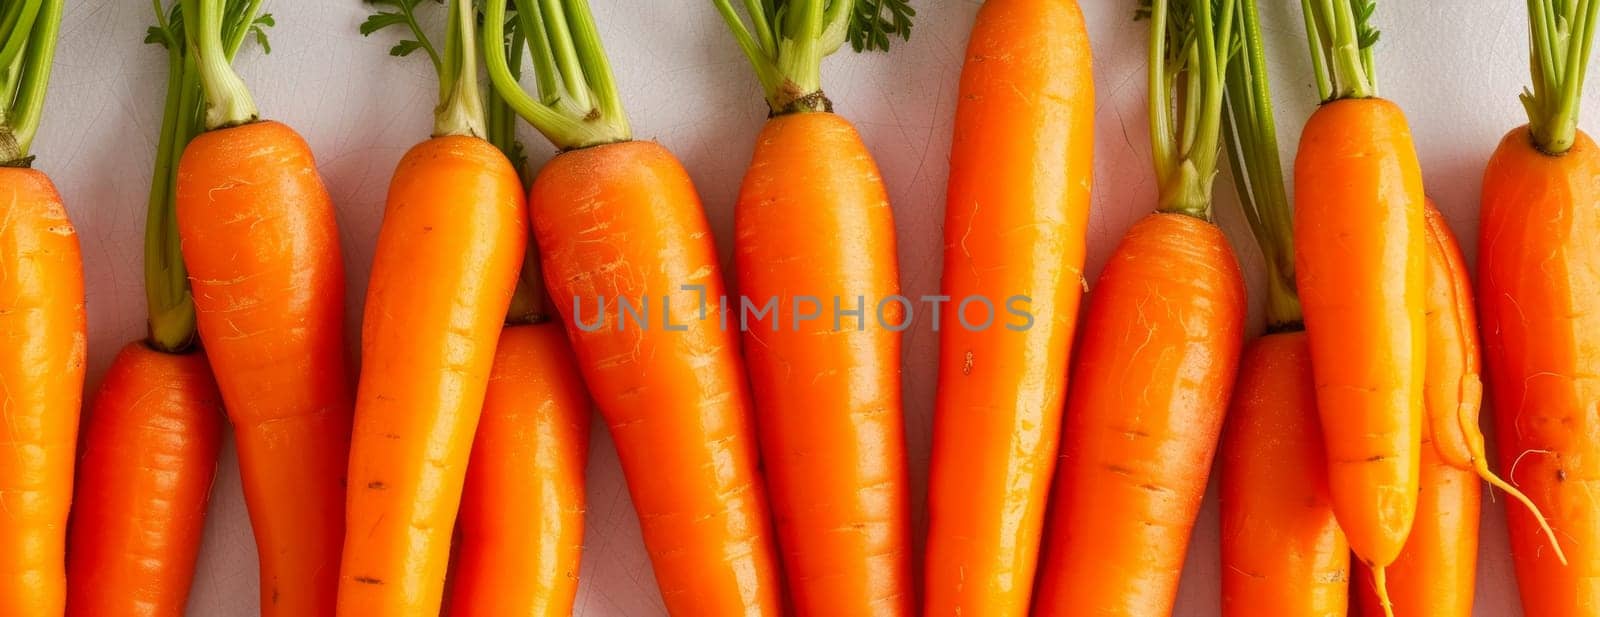 Top view of bunch of fresh organic carrots on white background representing concept of healthy food by papatonic